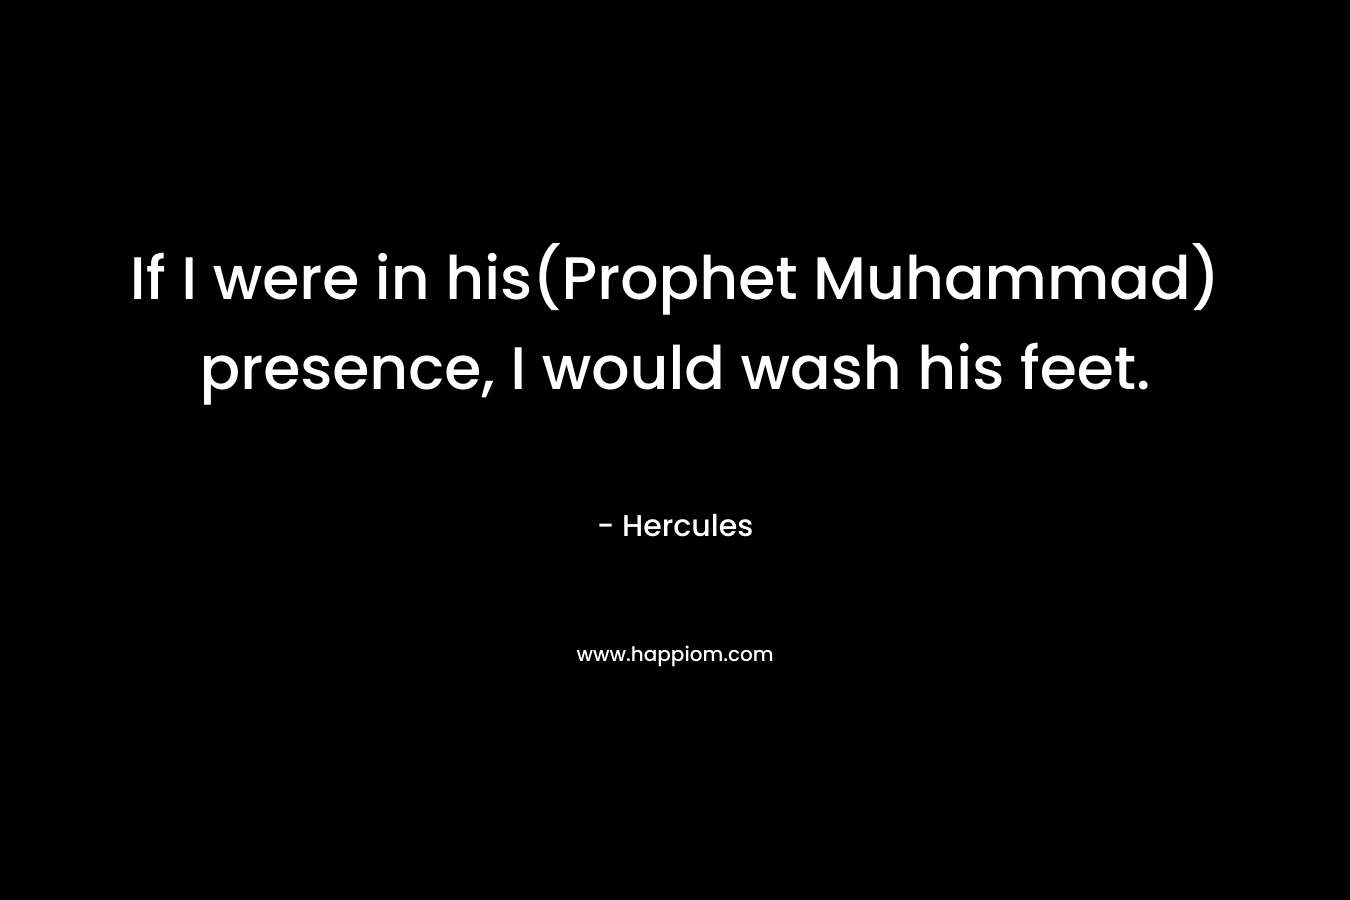 If I were in his(Prophet Muhammad) presence, I would wash his feet.